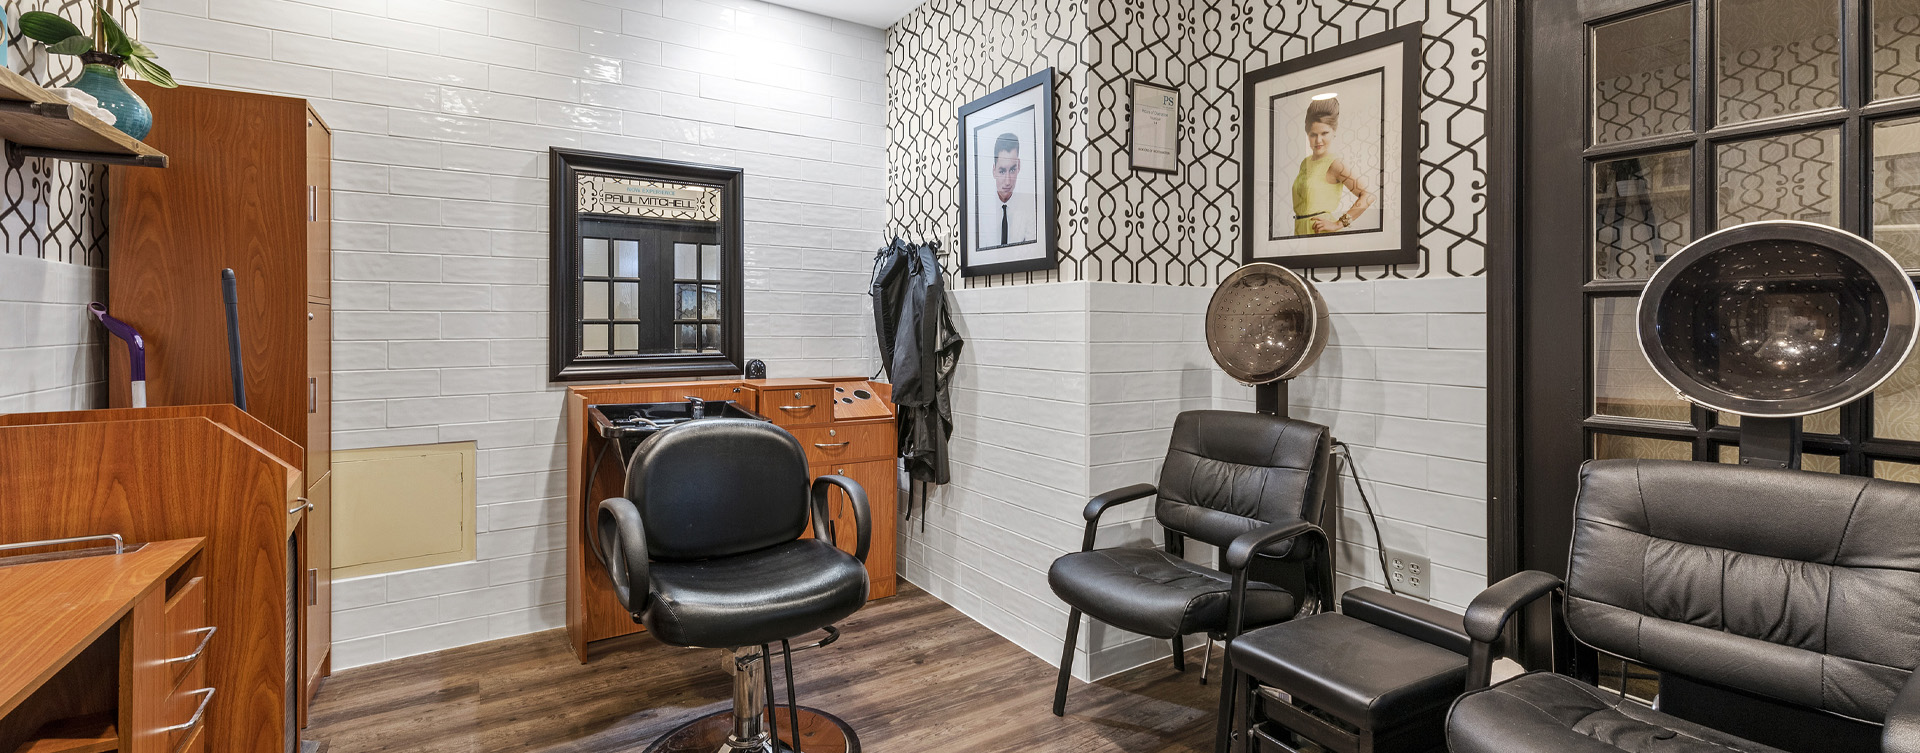 Receive personalized, at-home treatment from our stylist in the salon at Bickford of Worthington